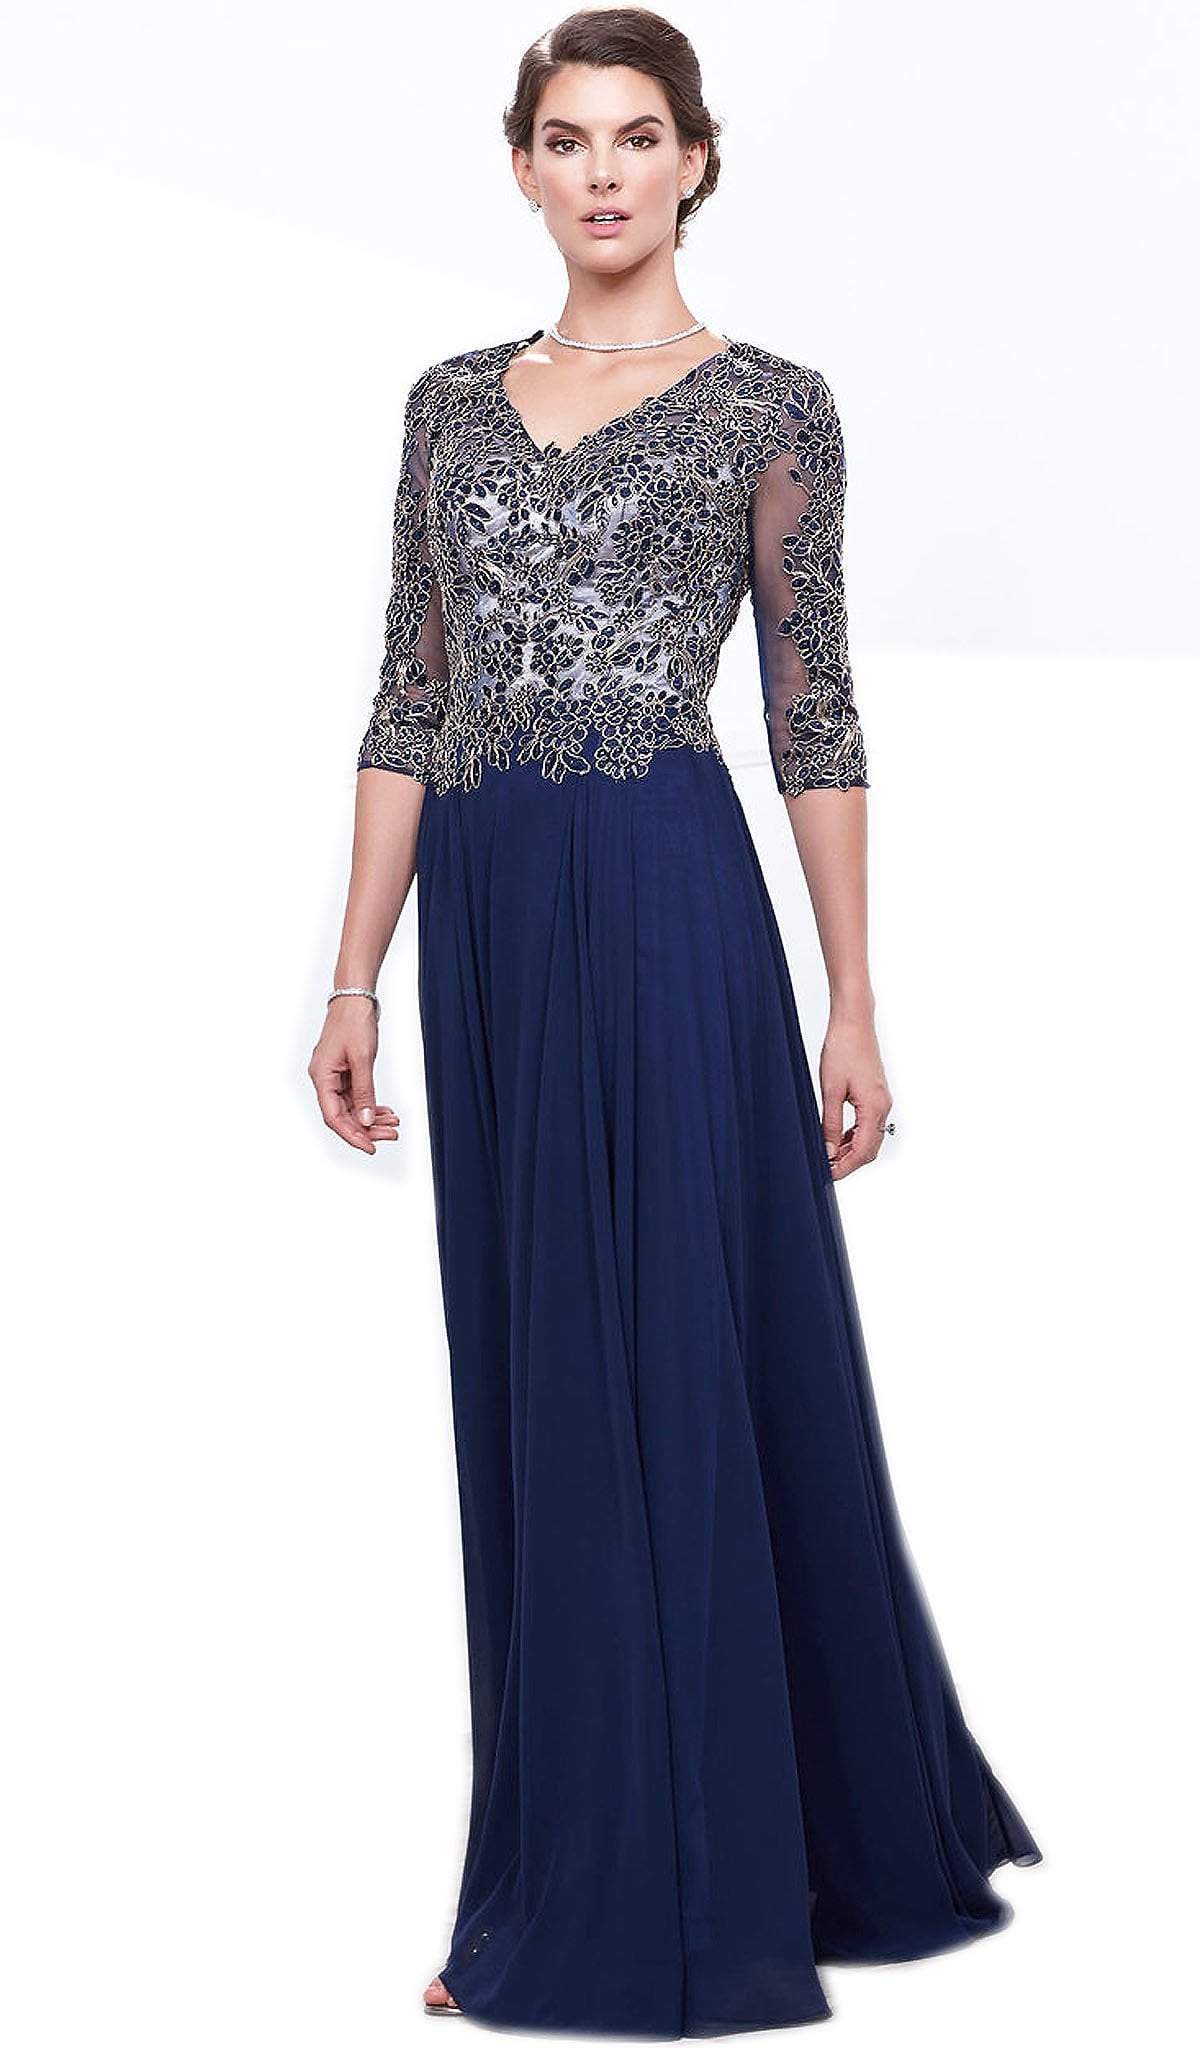 Nox Anabel - 5144 Embroidered A-Line Dress Special Occasion Dress M / Navy